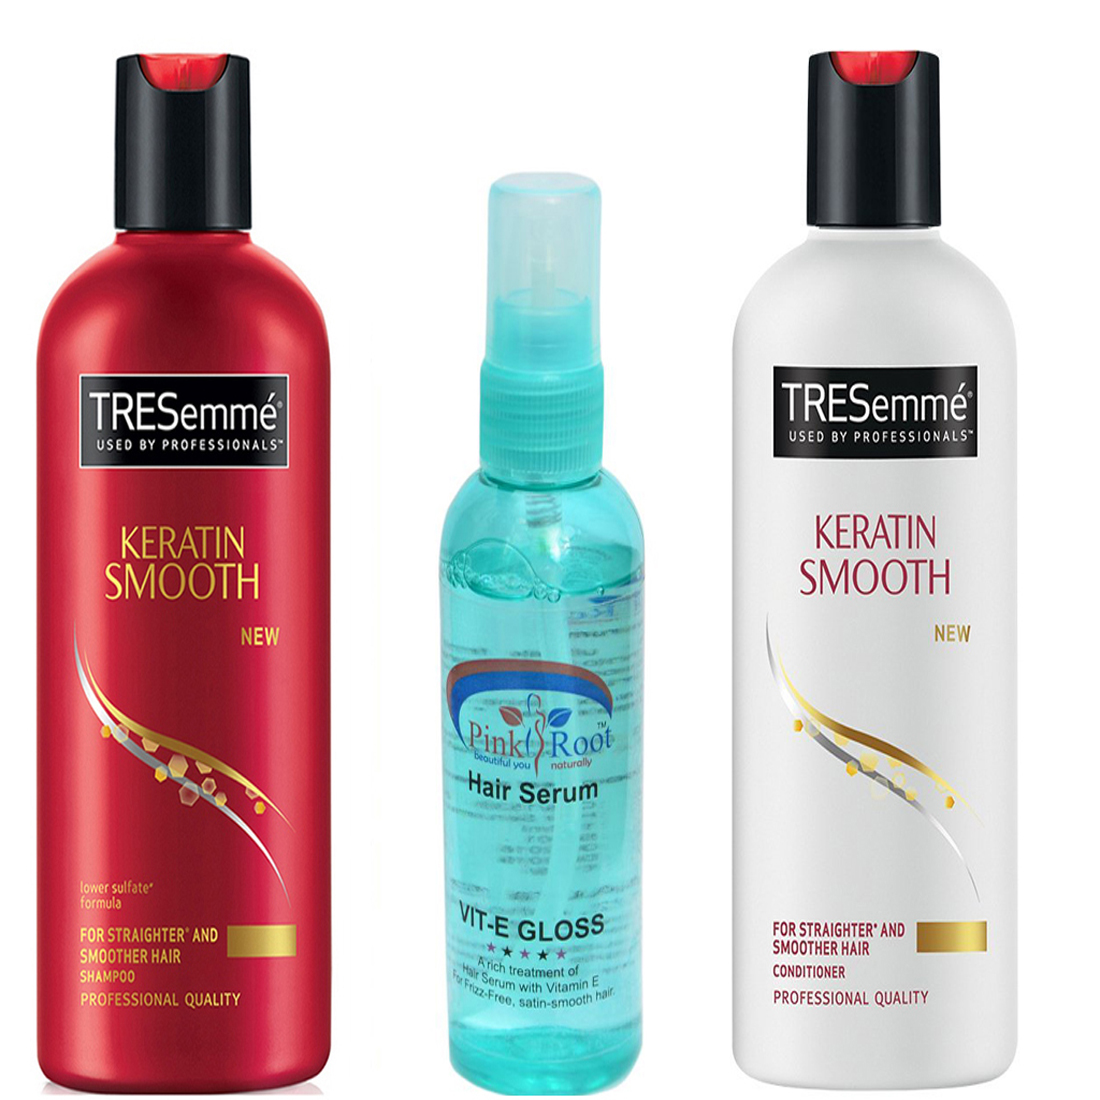 Buy Pink Root Hair Serum (100ml) with TRESemme Keratin Smooth for